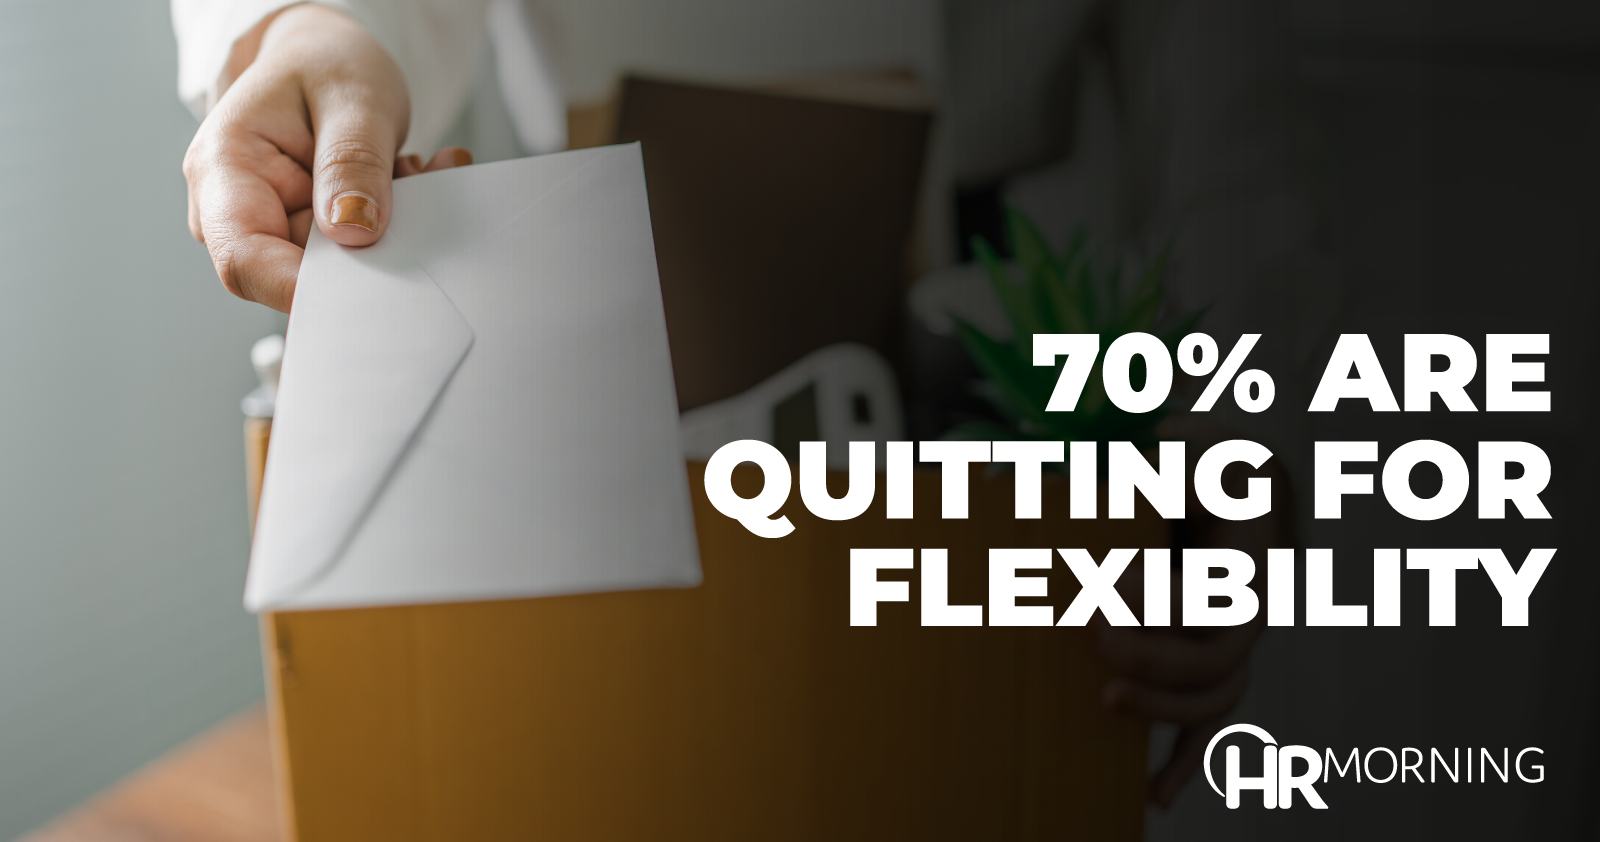 70% Are Quitting For Flexibility